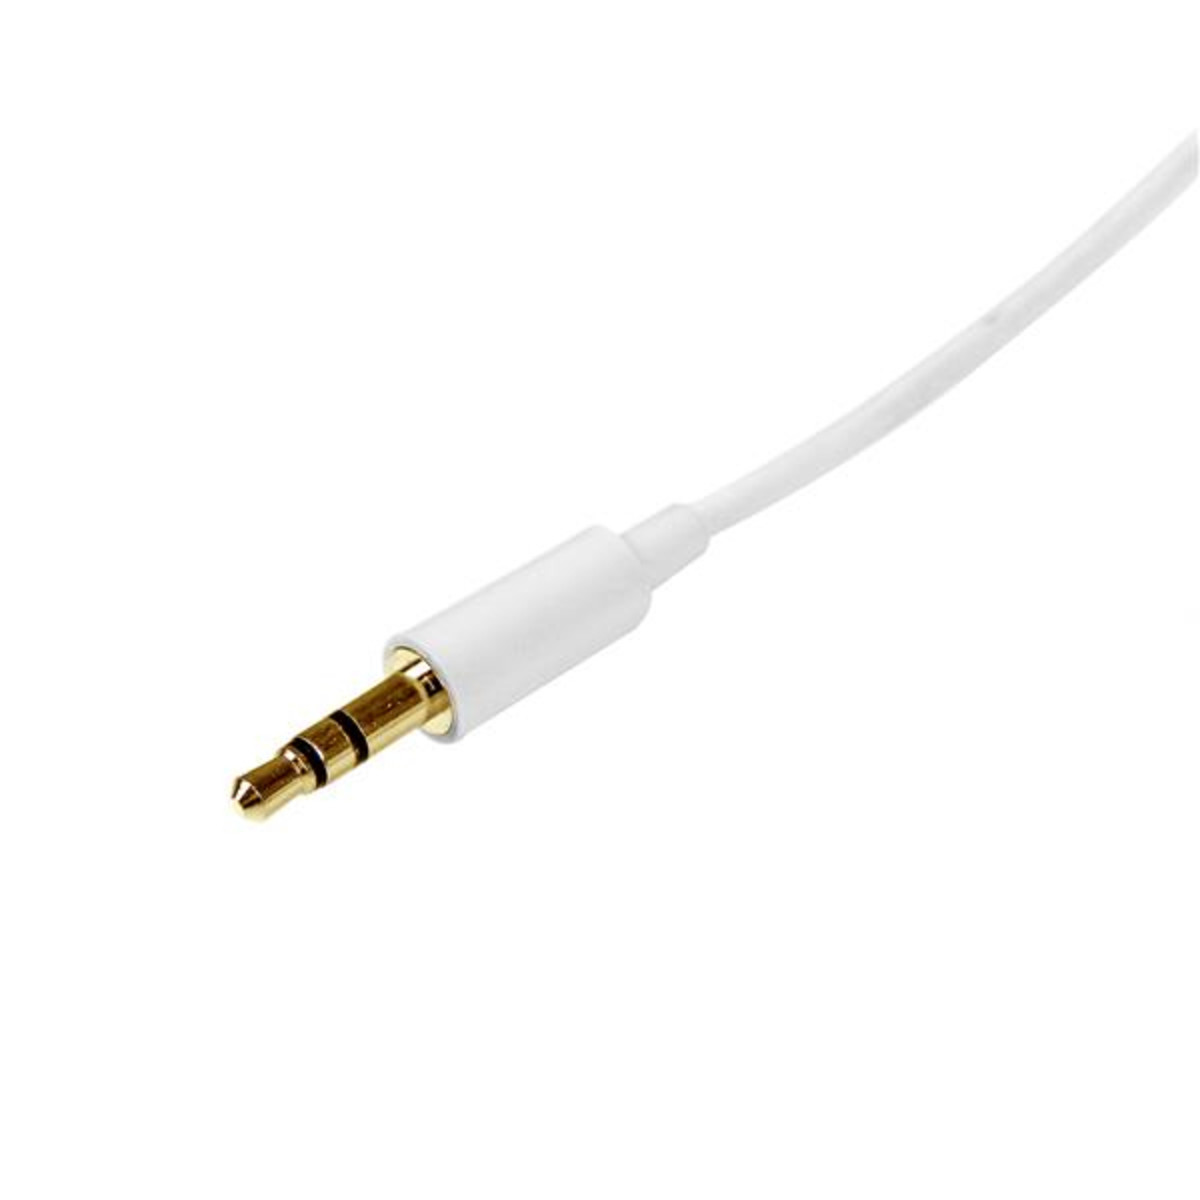 2m White Slim Stereo Audio Cable